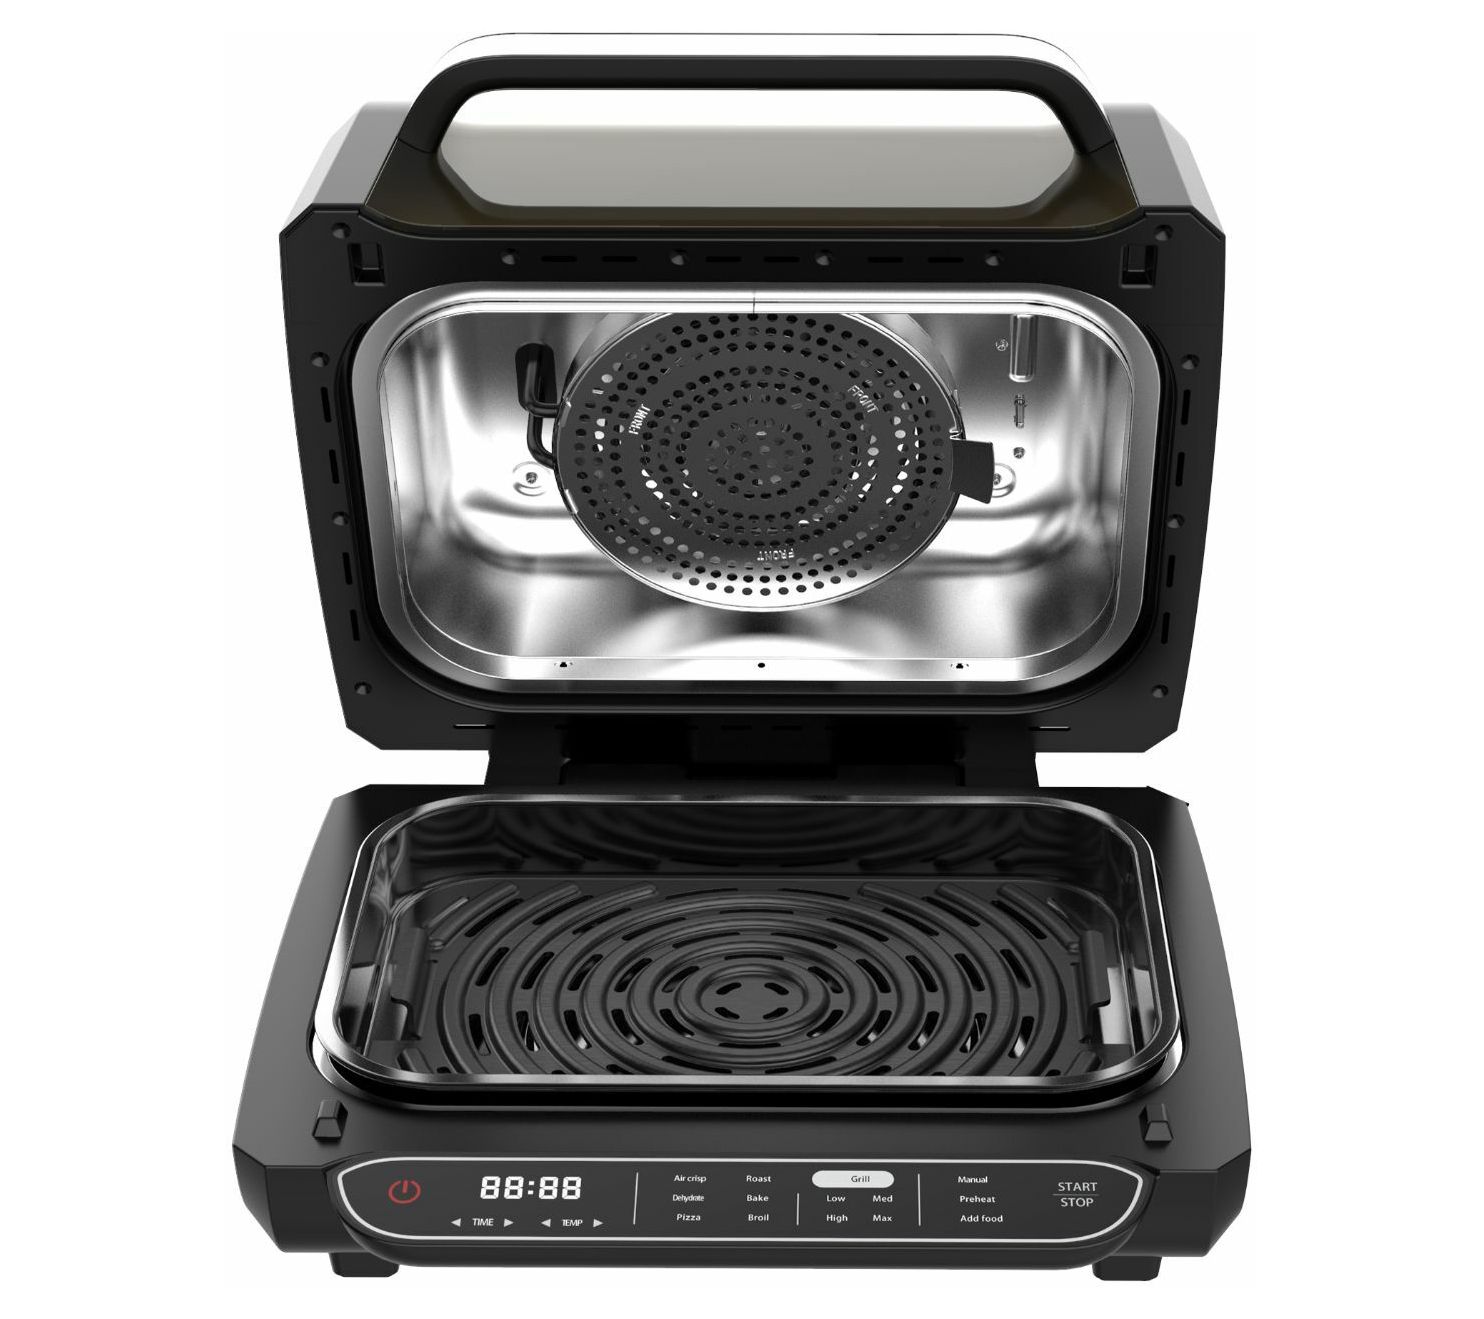 Geekchef 7-in-1 Indoor Grill with 6 qt Air Fryer Combe, Roast and Bake, Smokeless & Oilless, 1500W, Black